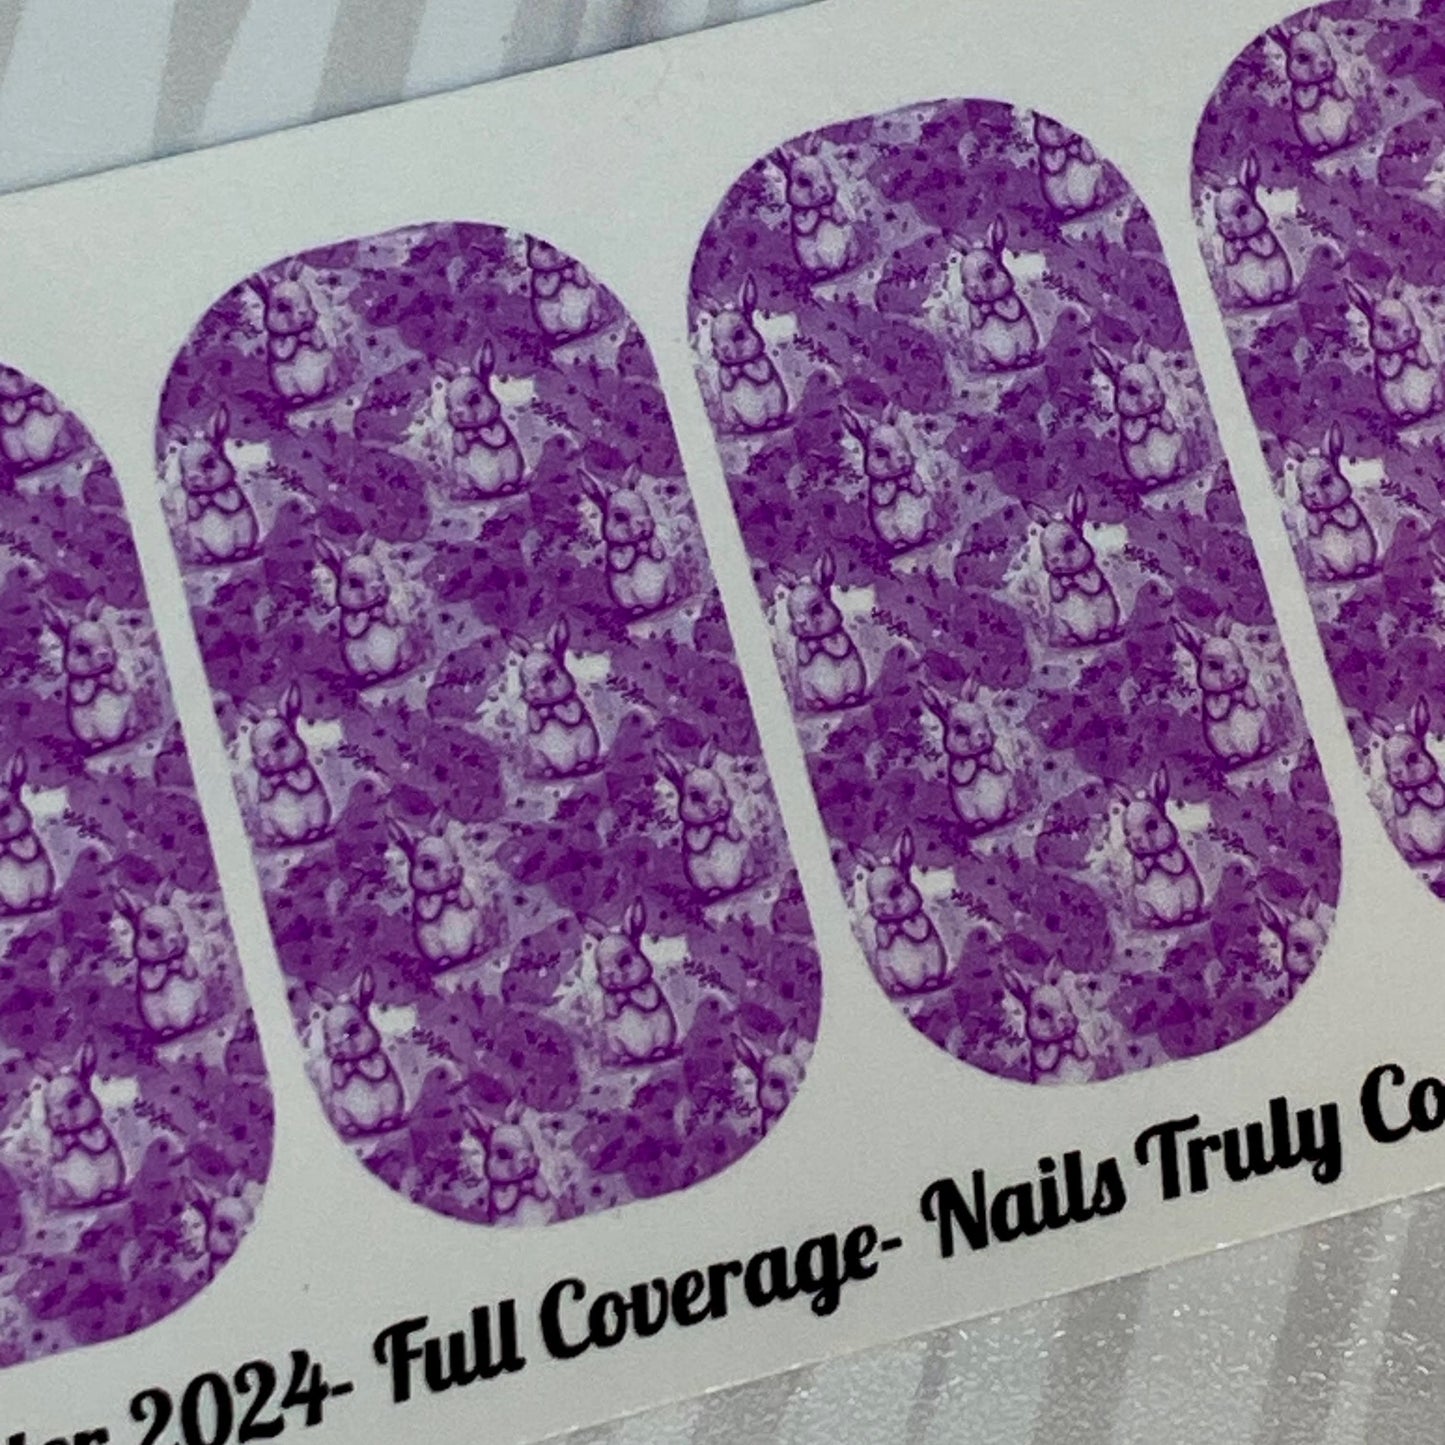 Easter Wallpaper- Full Coverage Nail Wraps